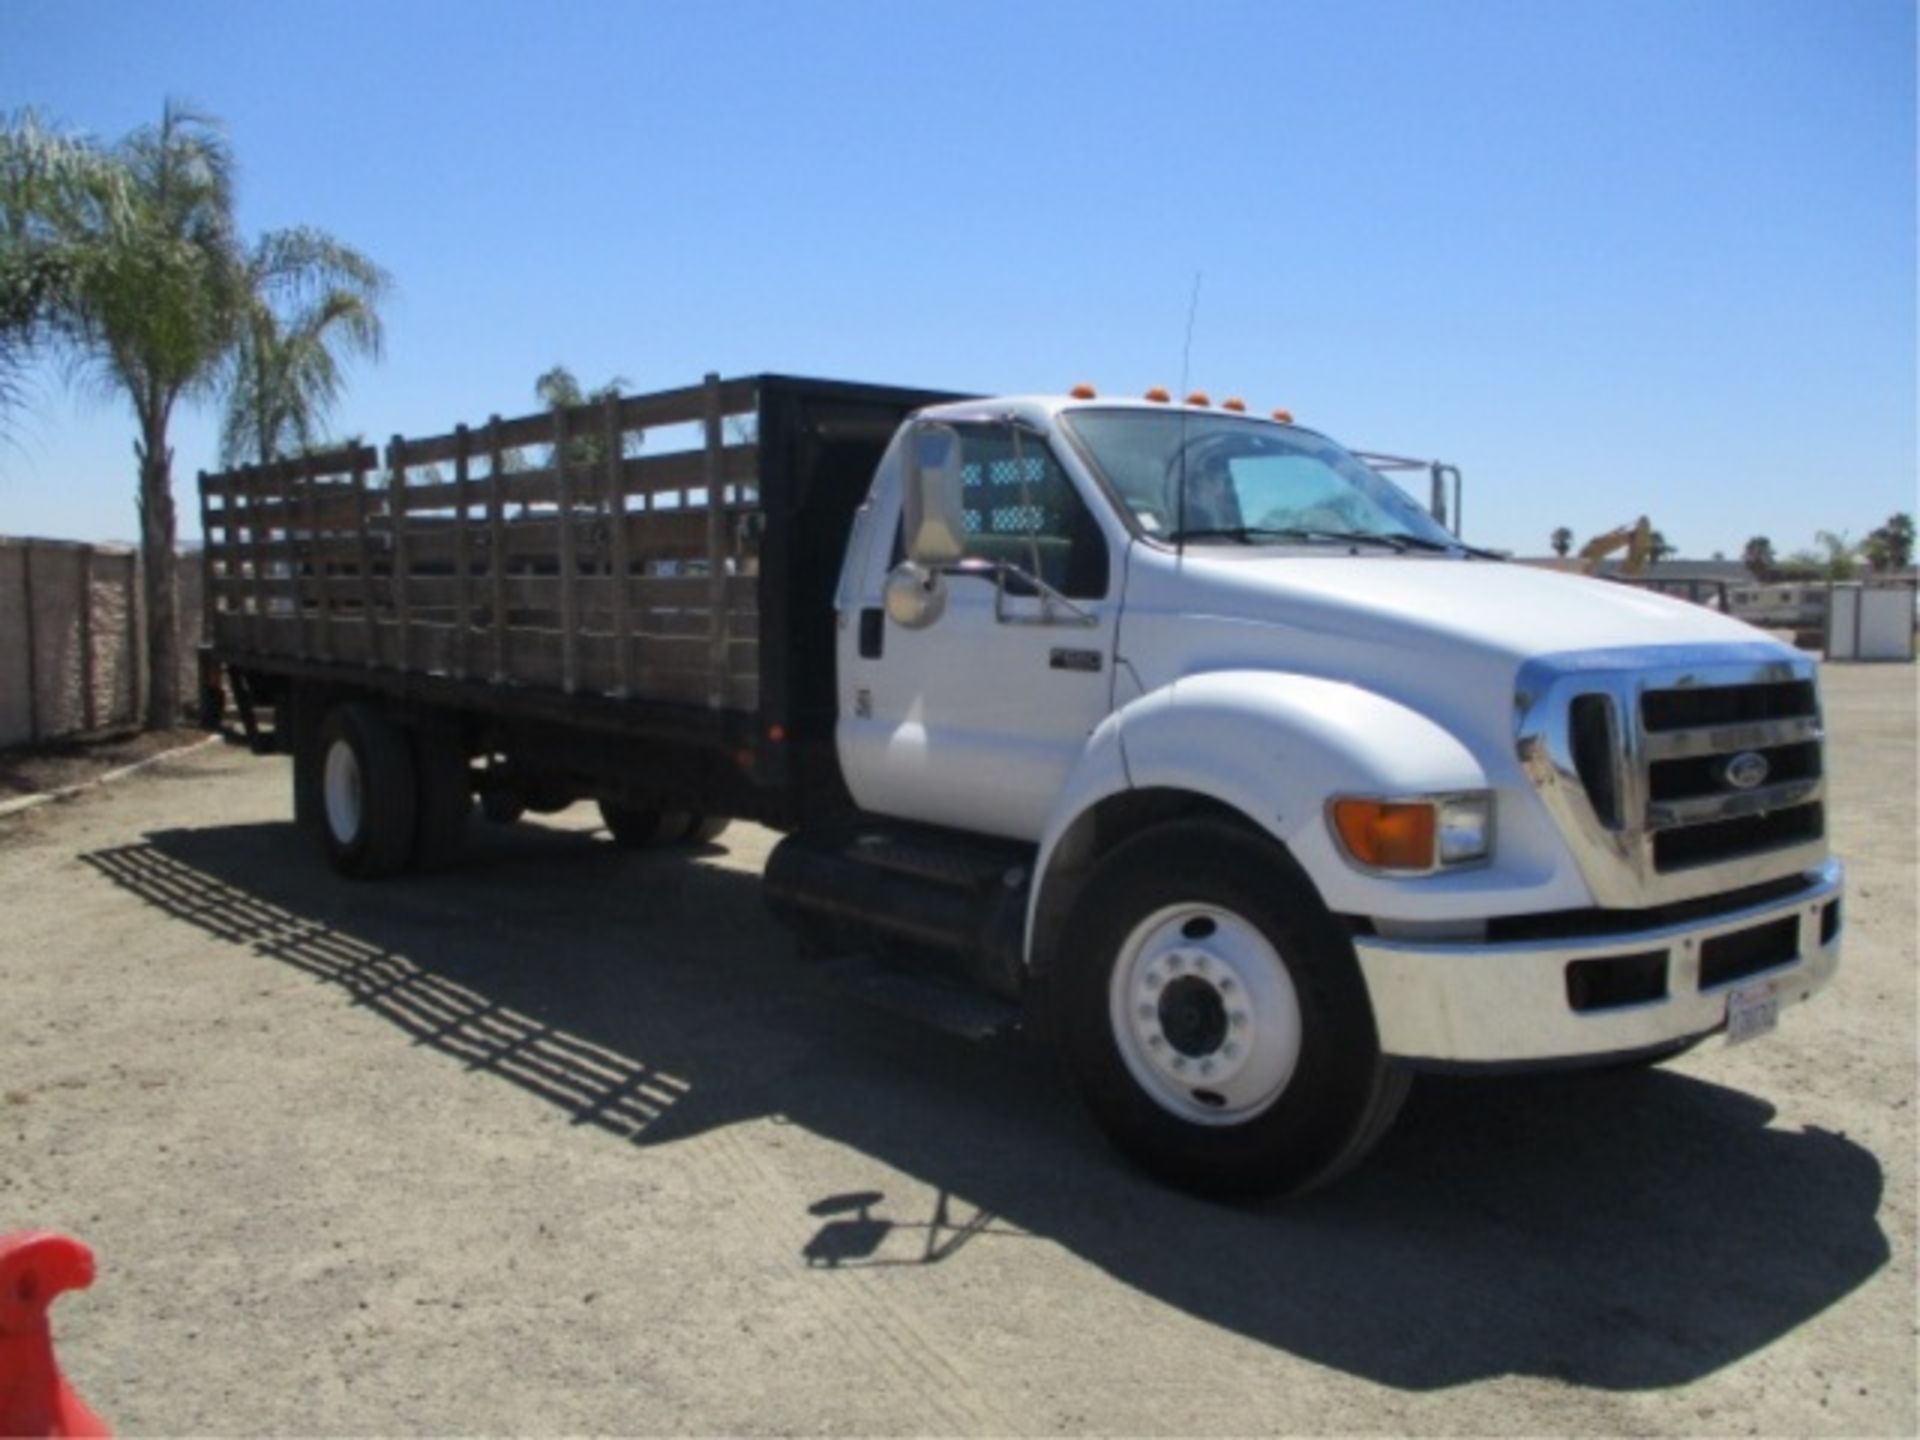 2005 Ford F650 S/A Flatbed Stakebed Truck, Cat C7 Acert 7.2L 6-Cyl Diesel, Automatic, Lift Gate, 24' - Image 6 of 61